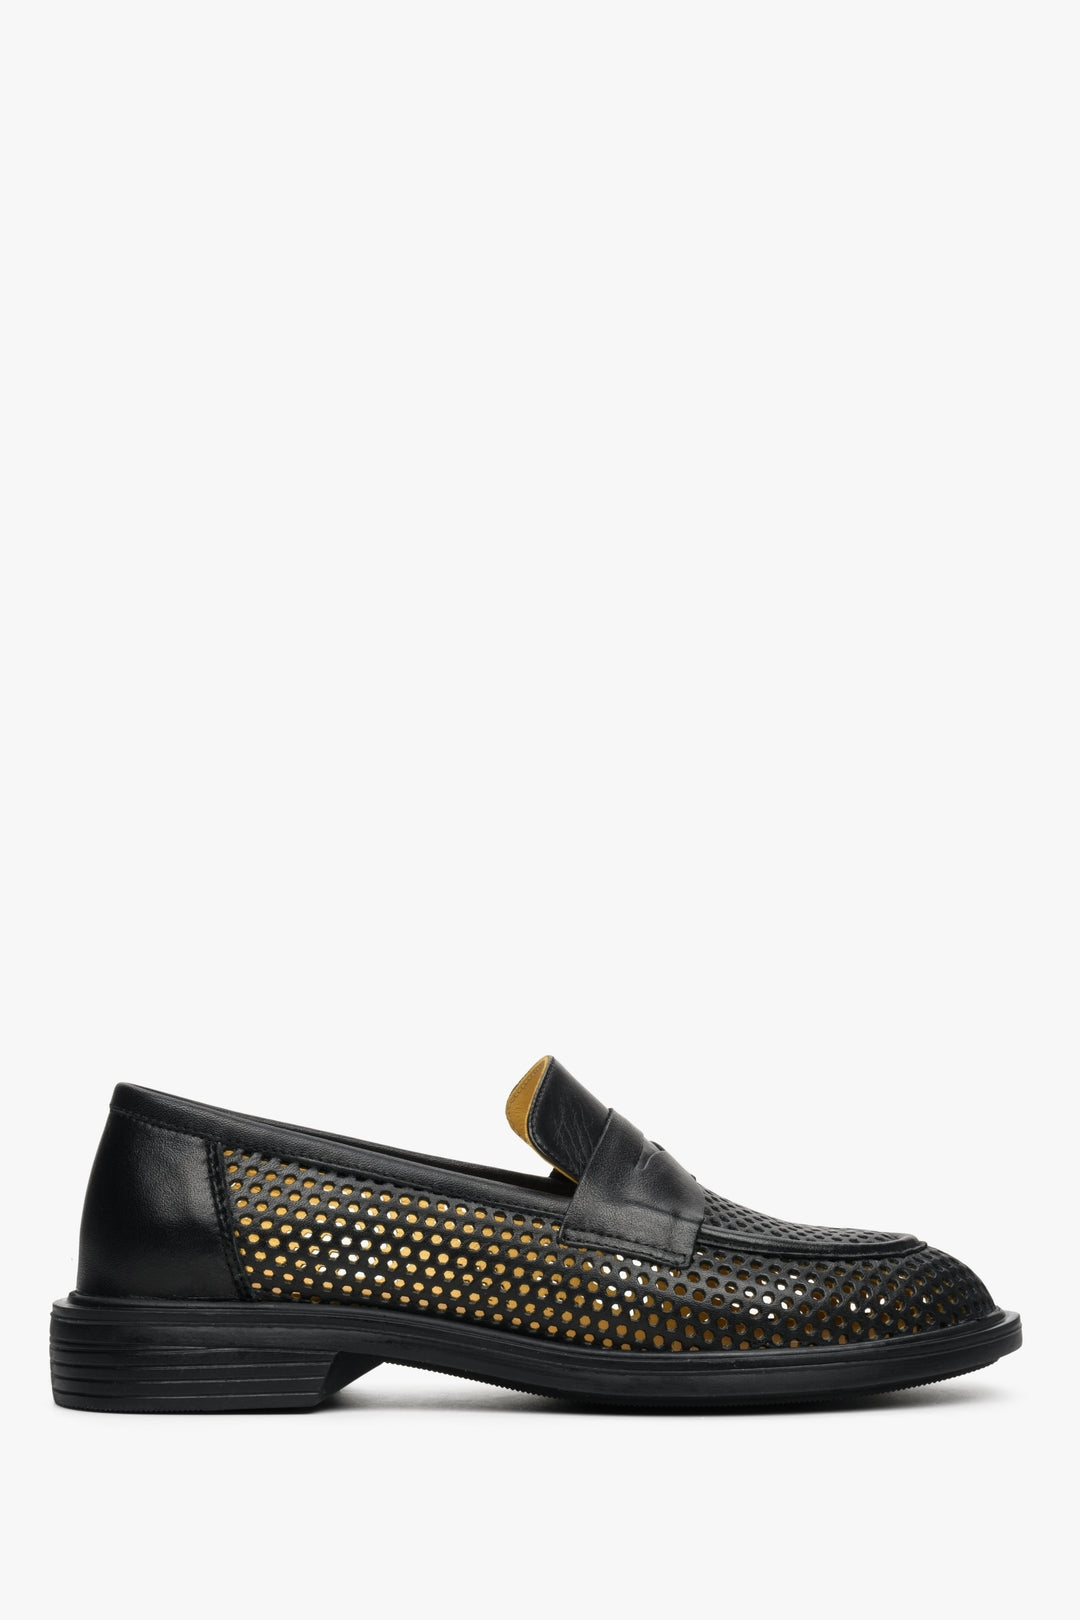 Women's Black Perforated Loafers made of Genuine Leather Estro ER00112827.